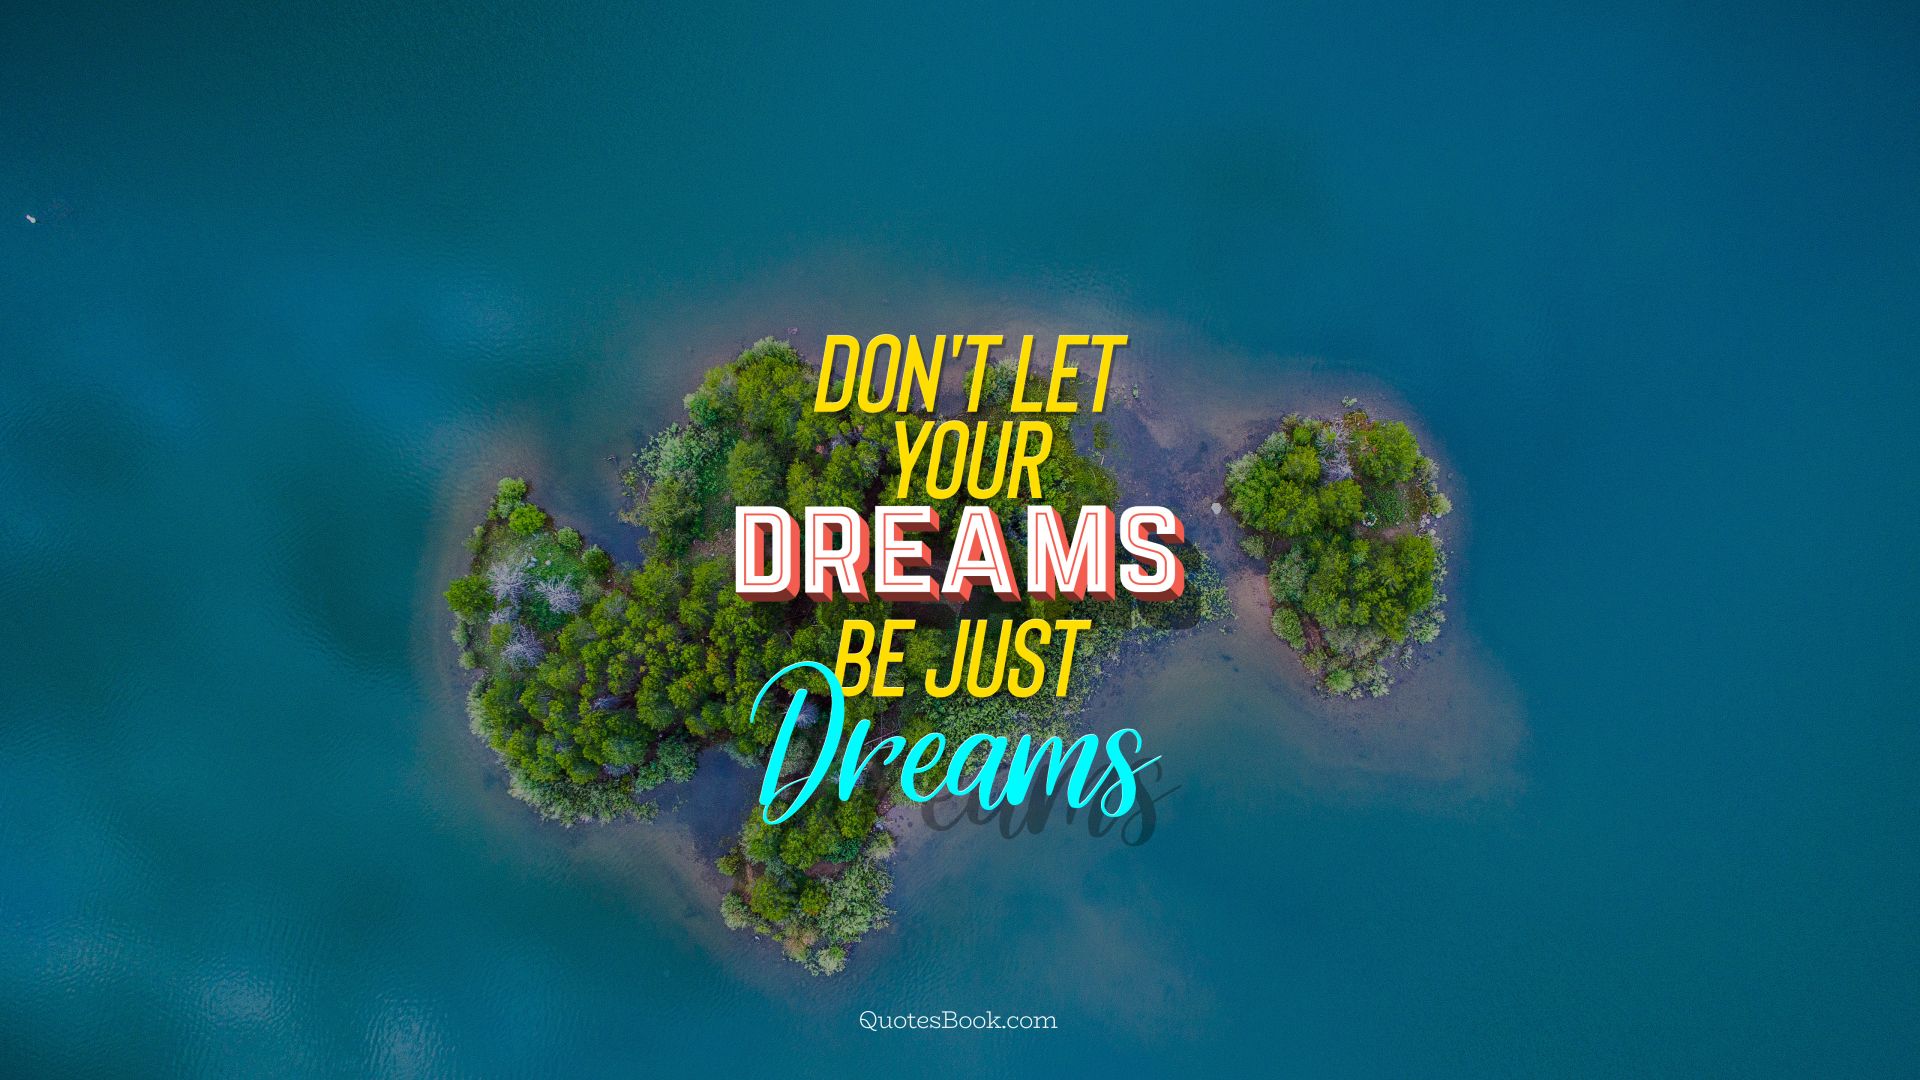 Don't let your dreams be just dreams